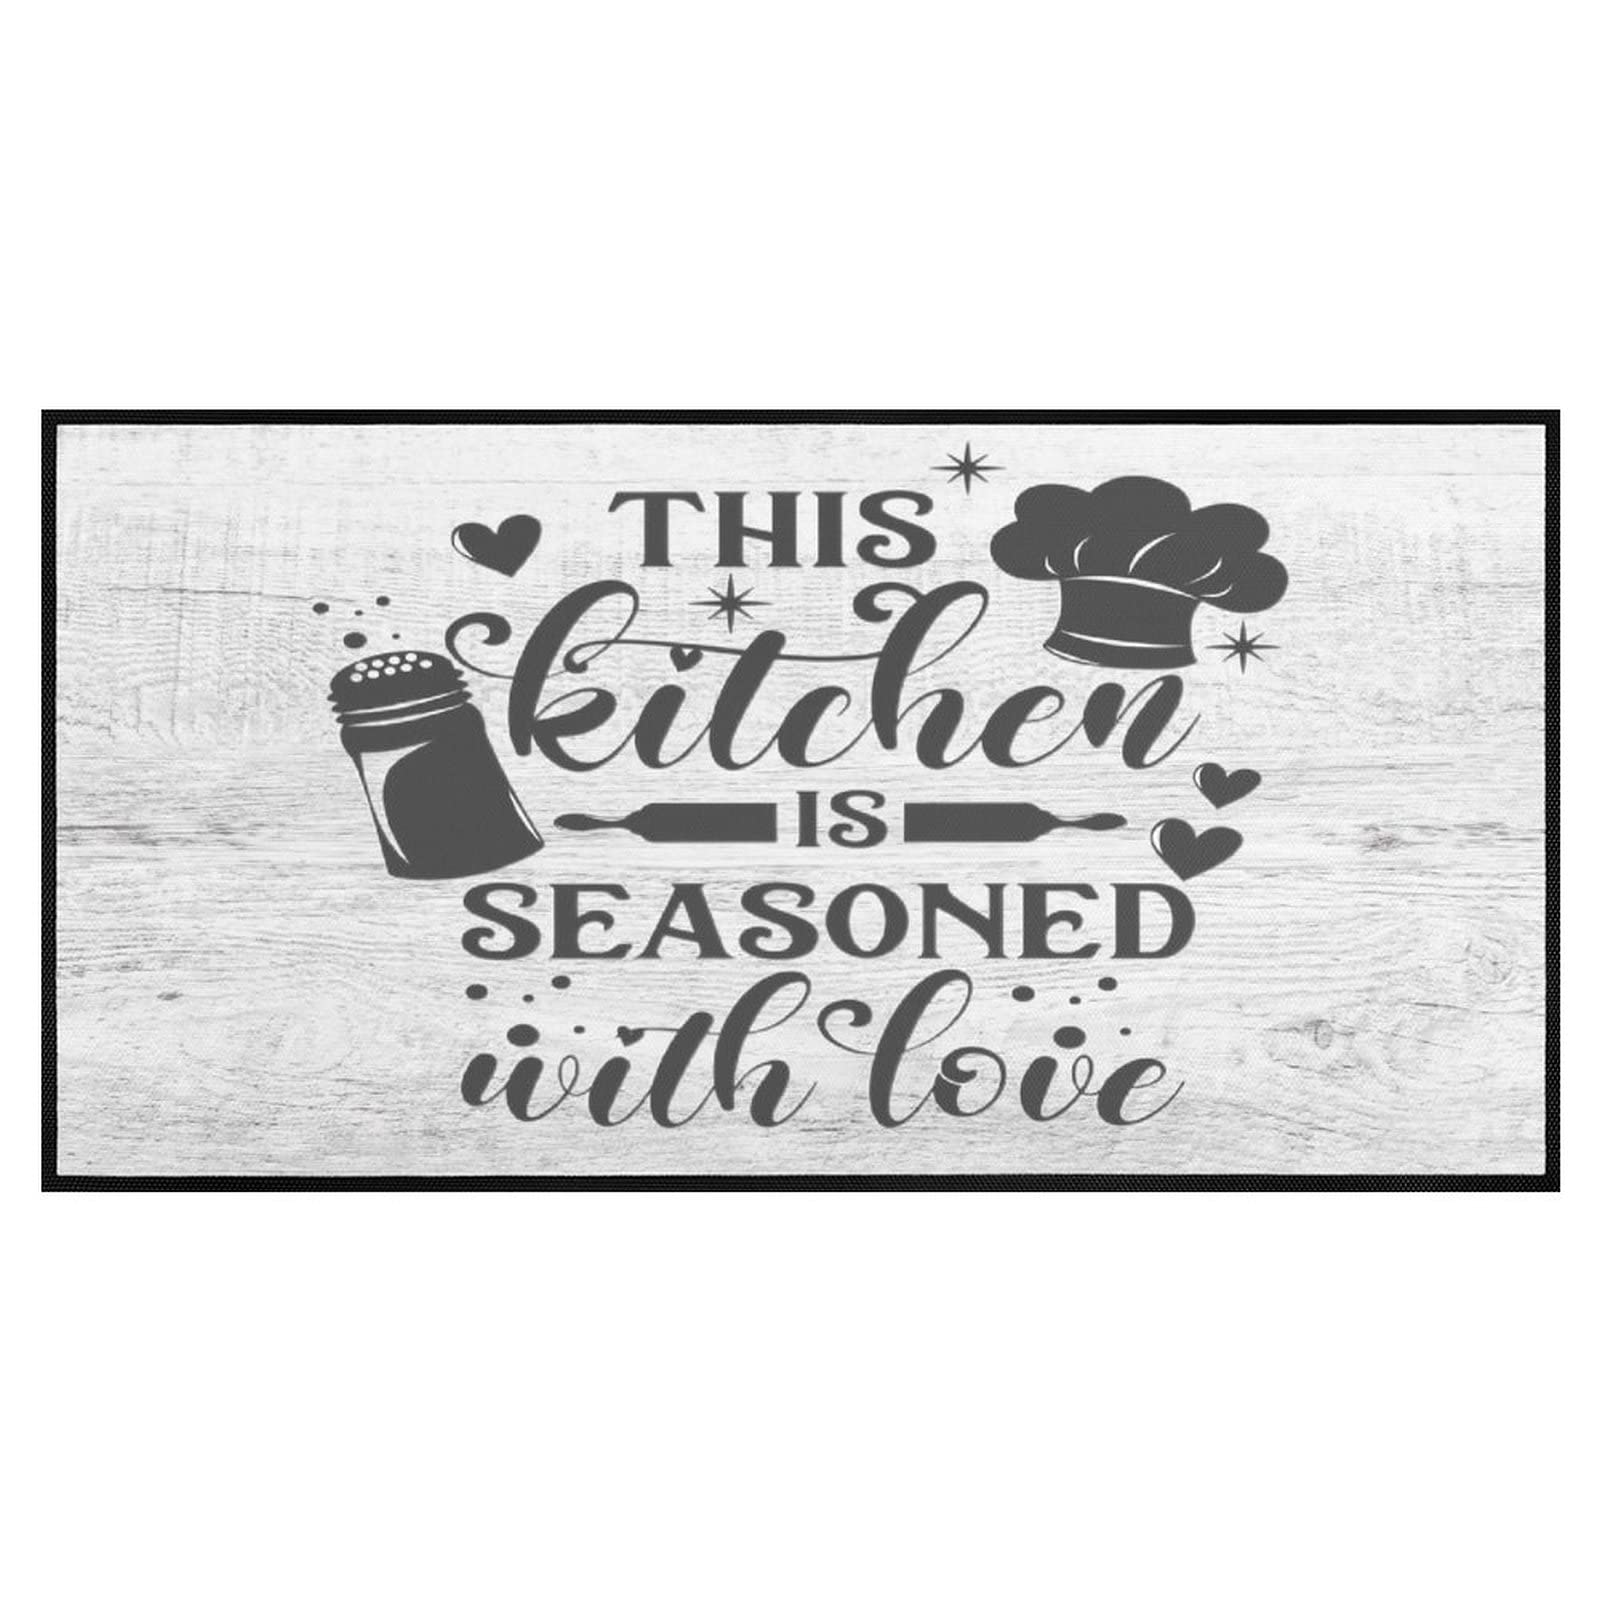 Kitchen Rugs This Kitchen is Seasoned with Love Non-Slip Soft Kitchen Mats Funny Kitchen Quotes Bath Rug Runner Doormats Carpet for Home Decor, 39" X 20"